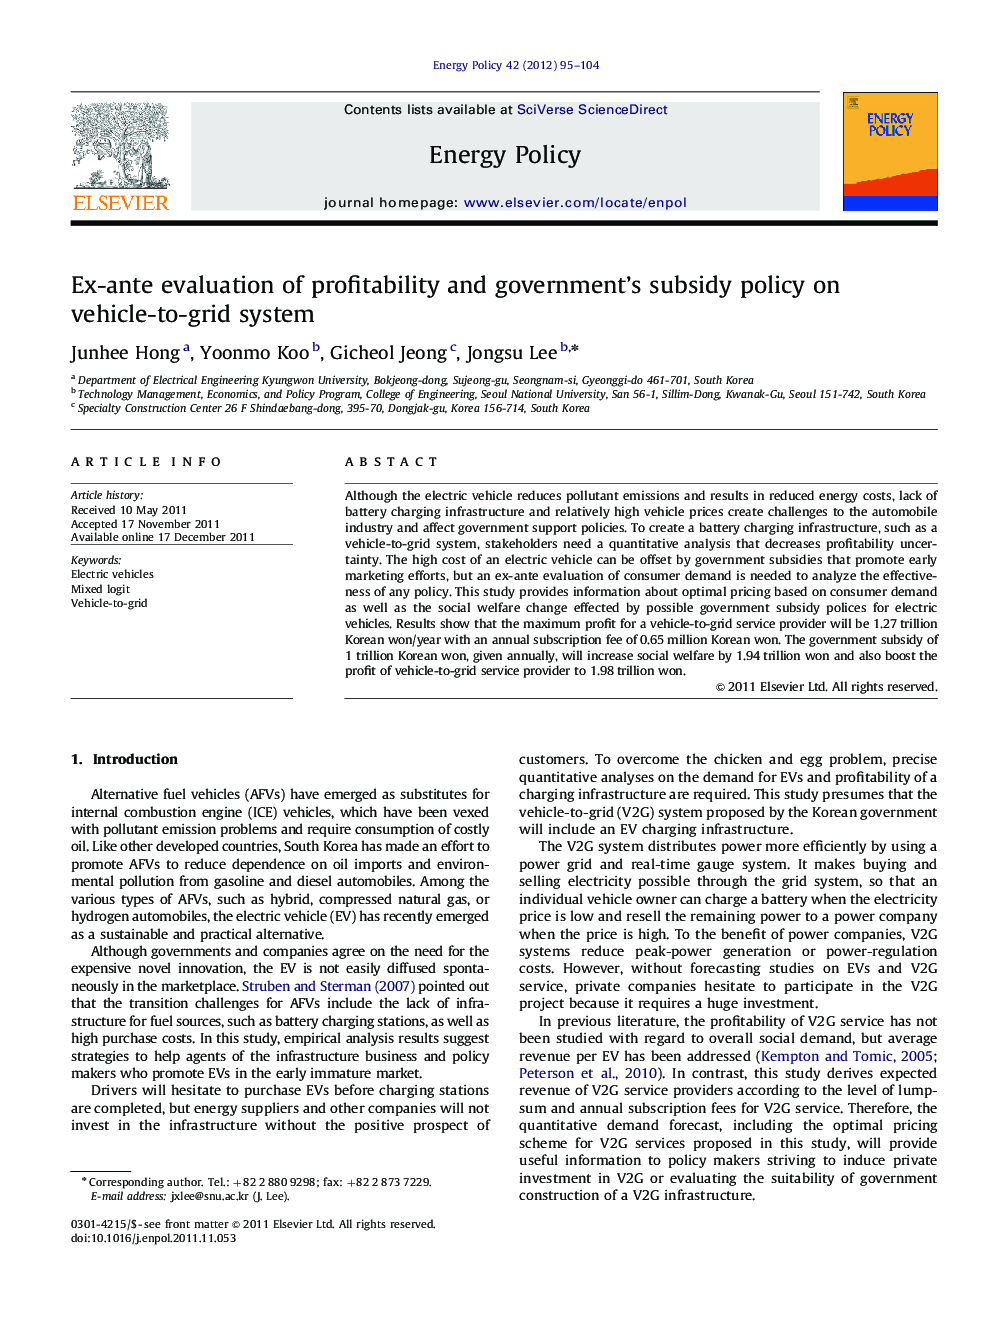 Ex-ante evaluation of profitability and government's subsidy policy on vehicle-to-grid system